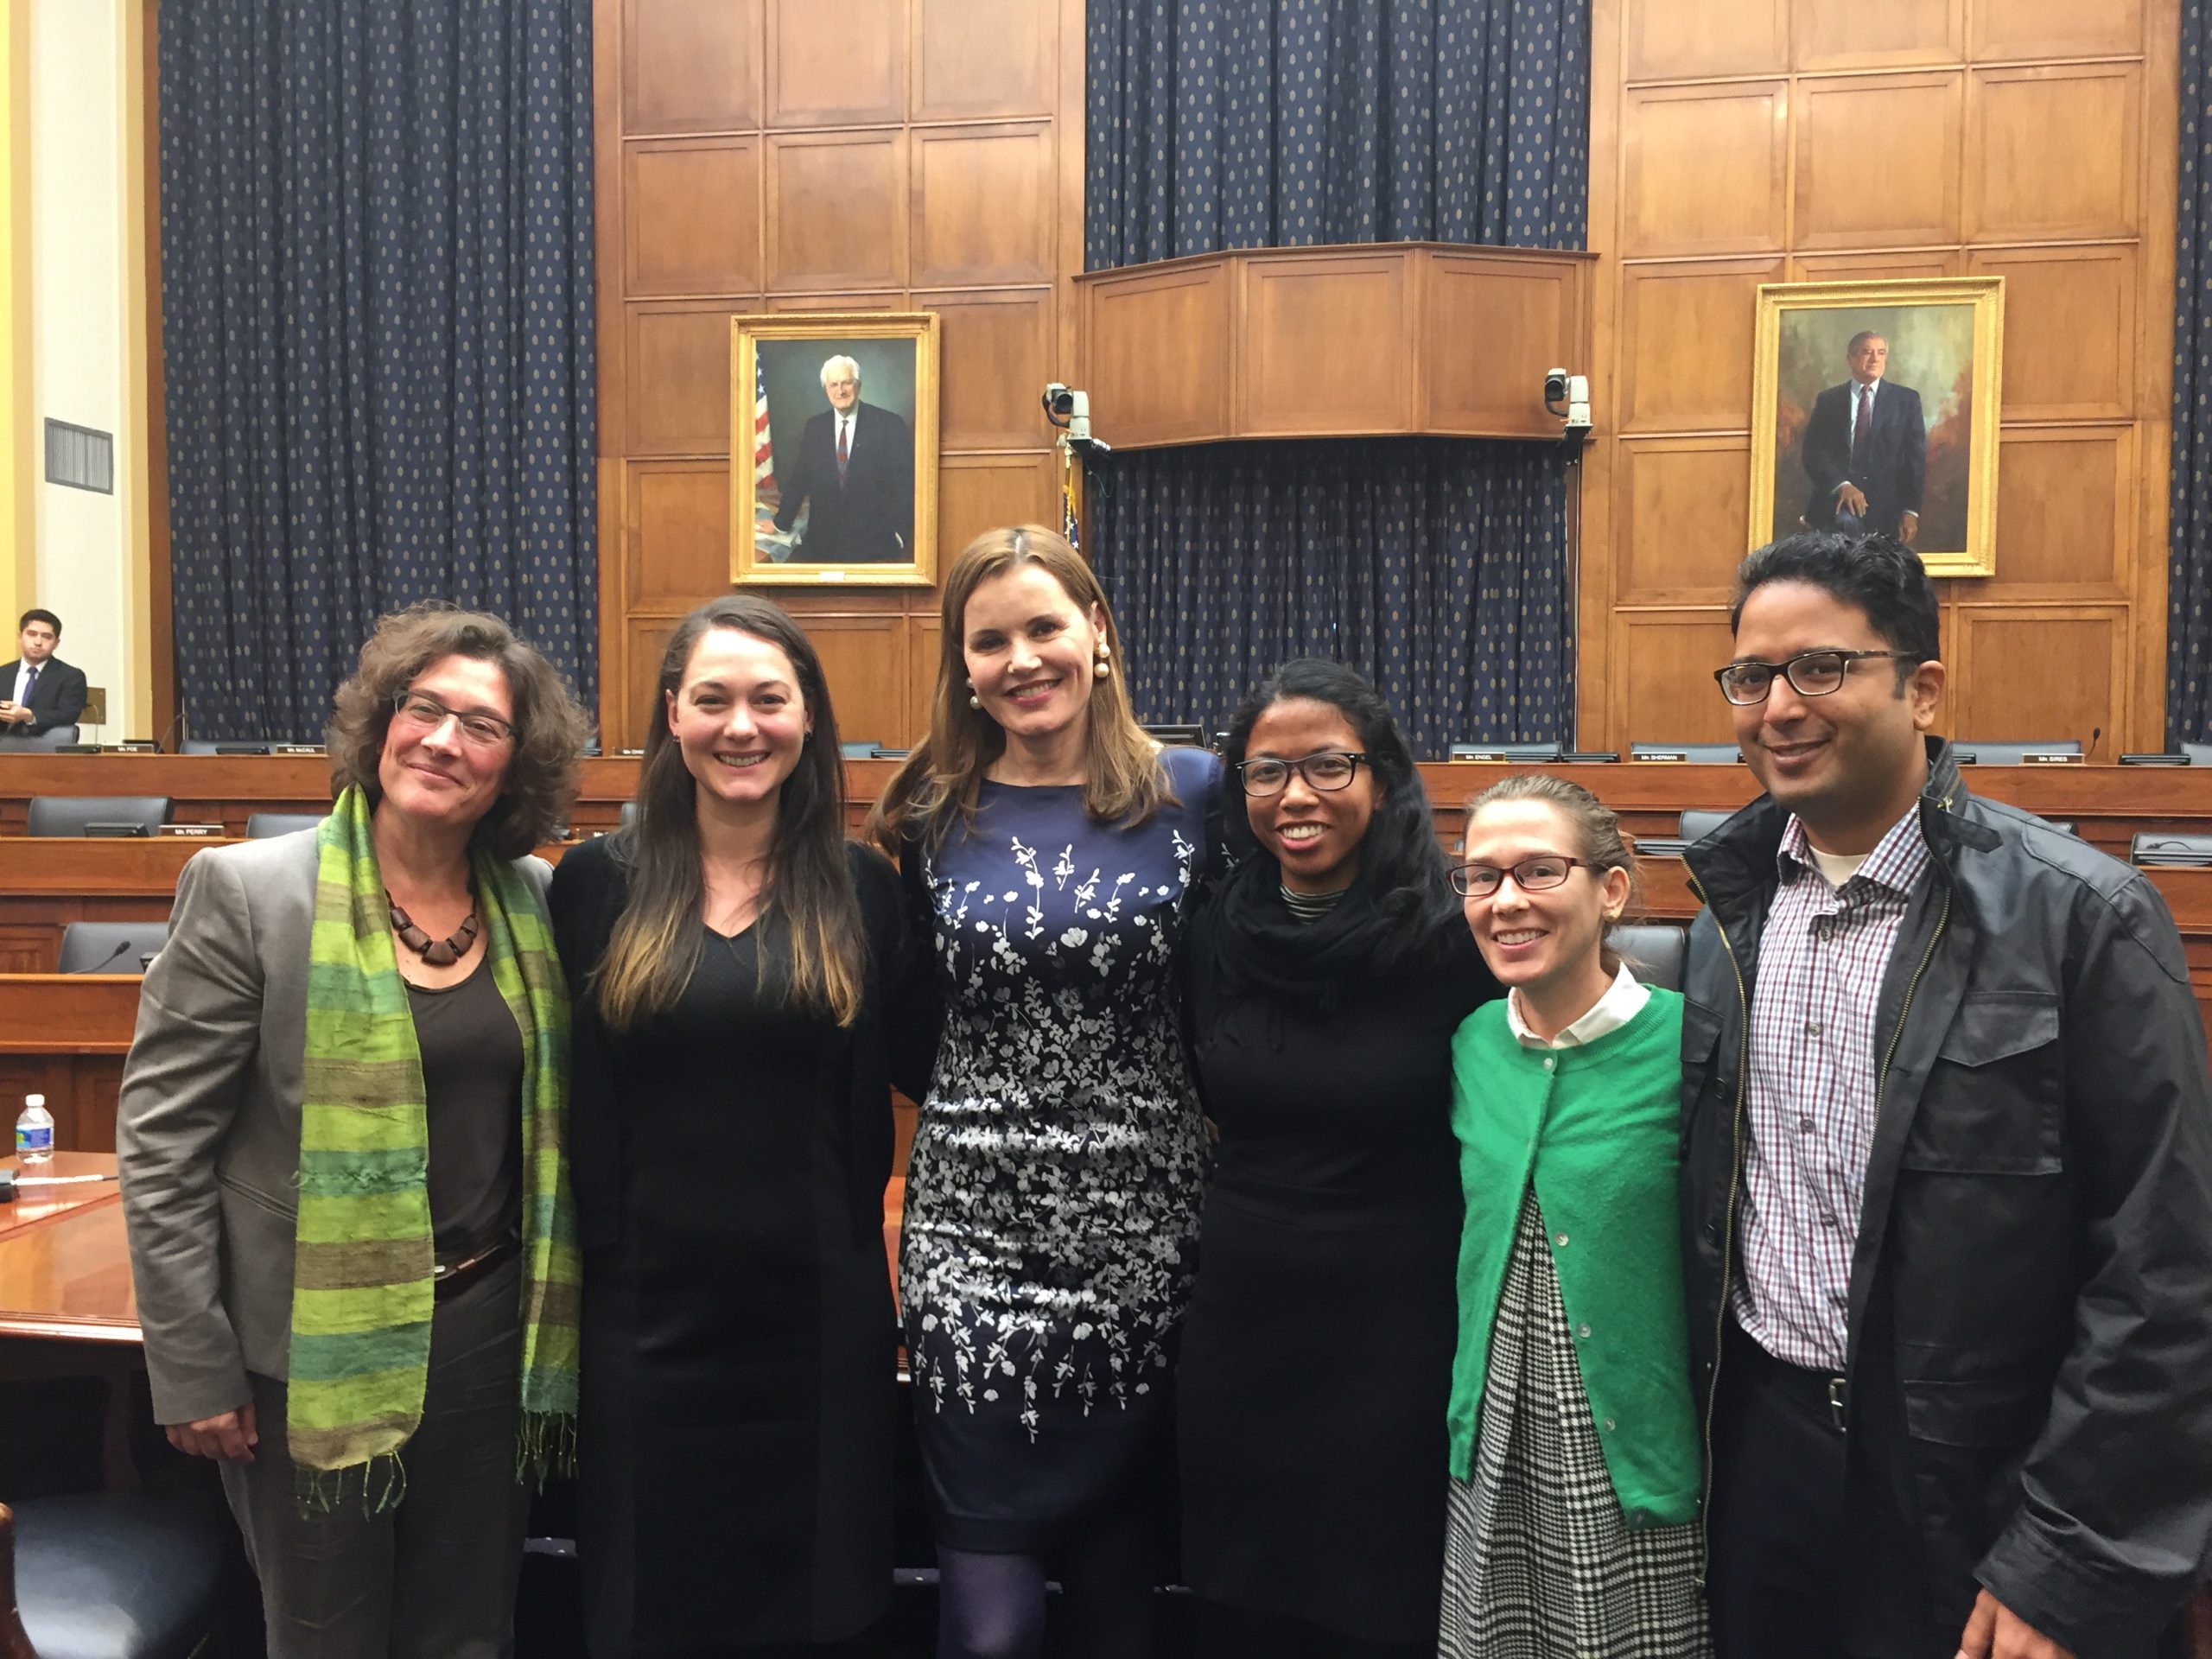 The A4AI team with witness Geena Davis at the hearing.